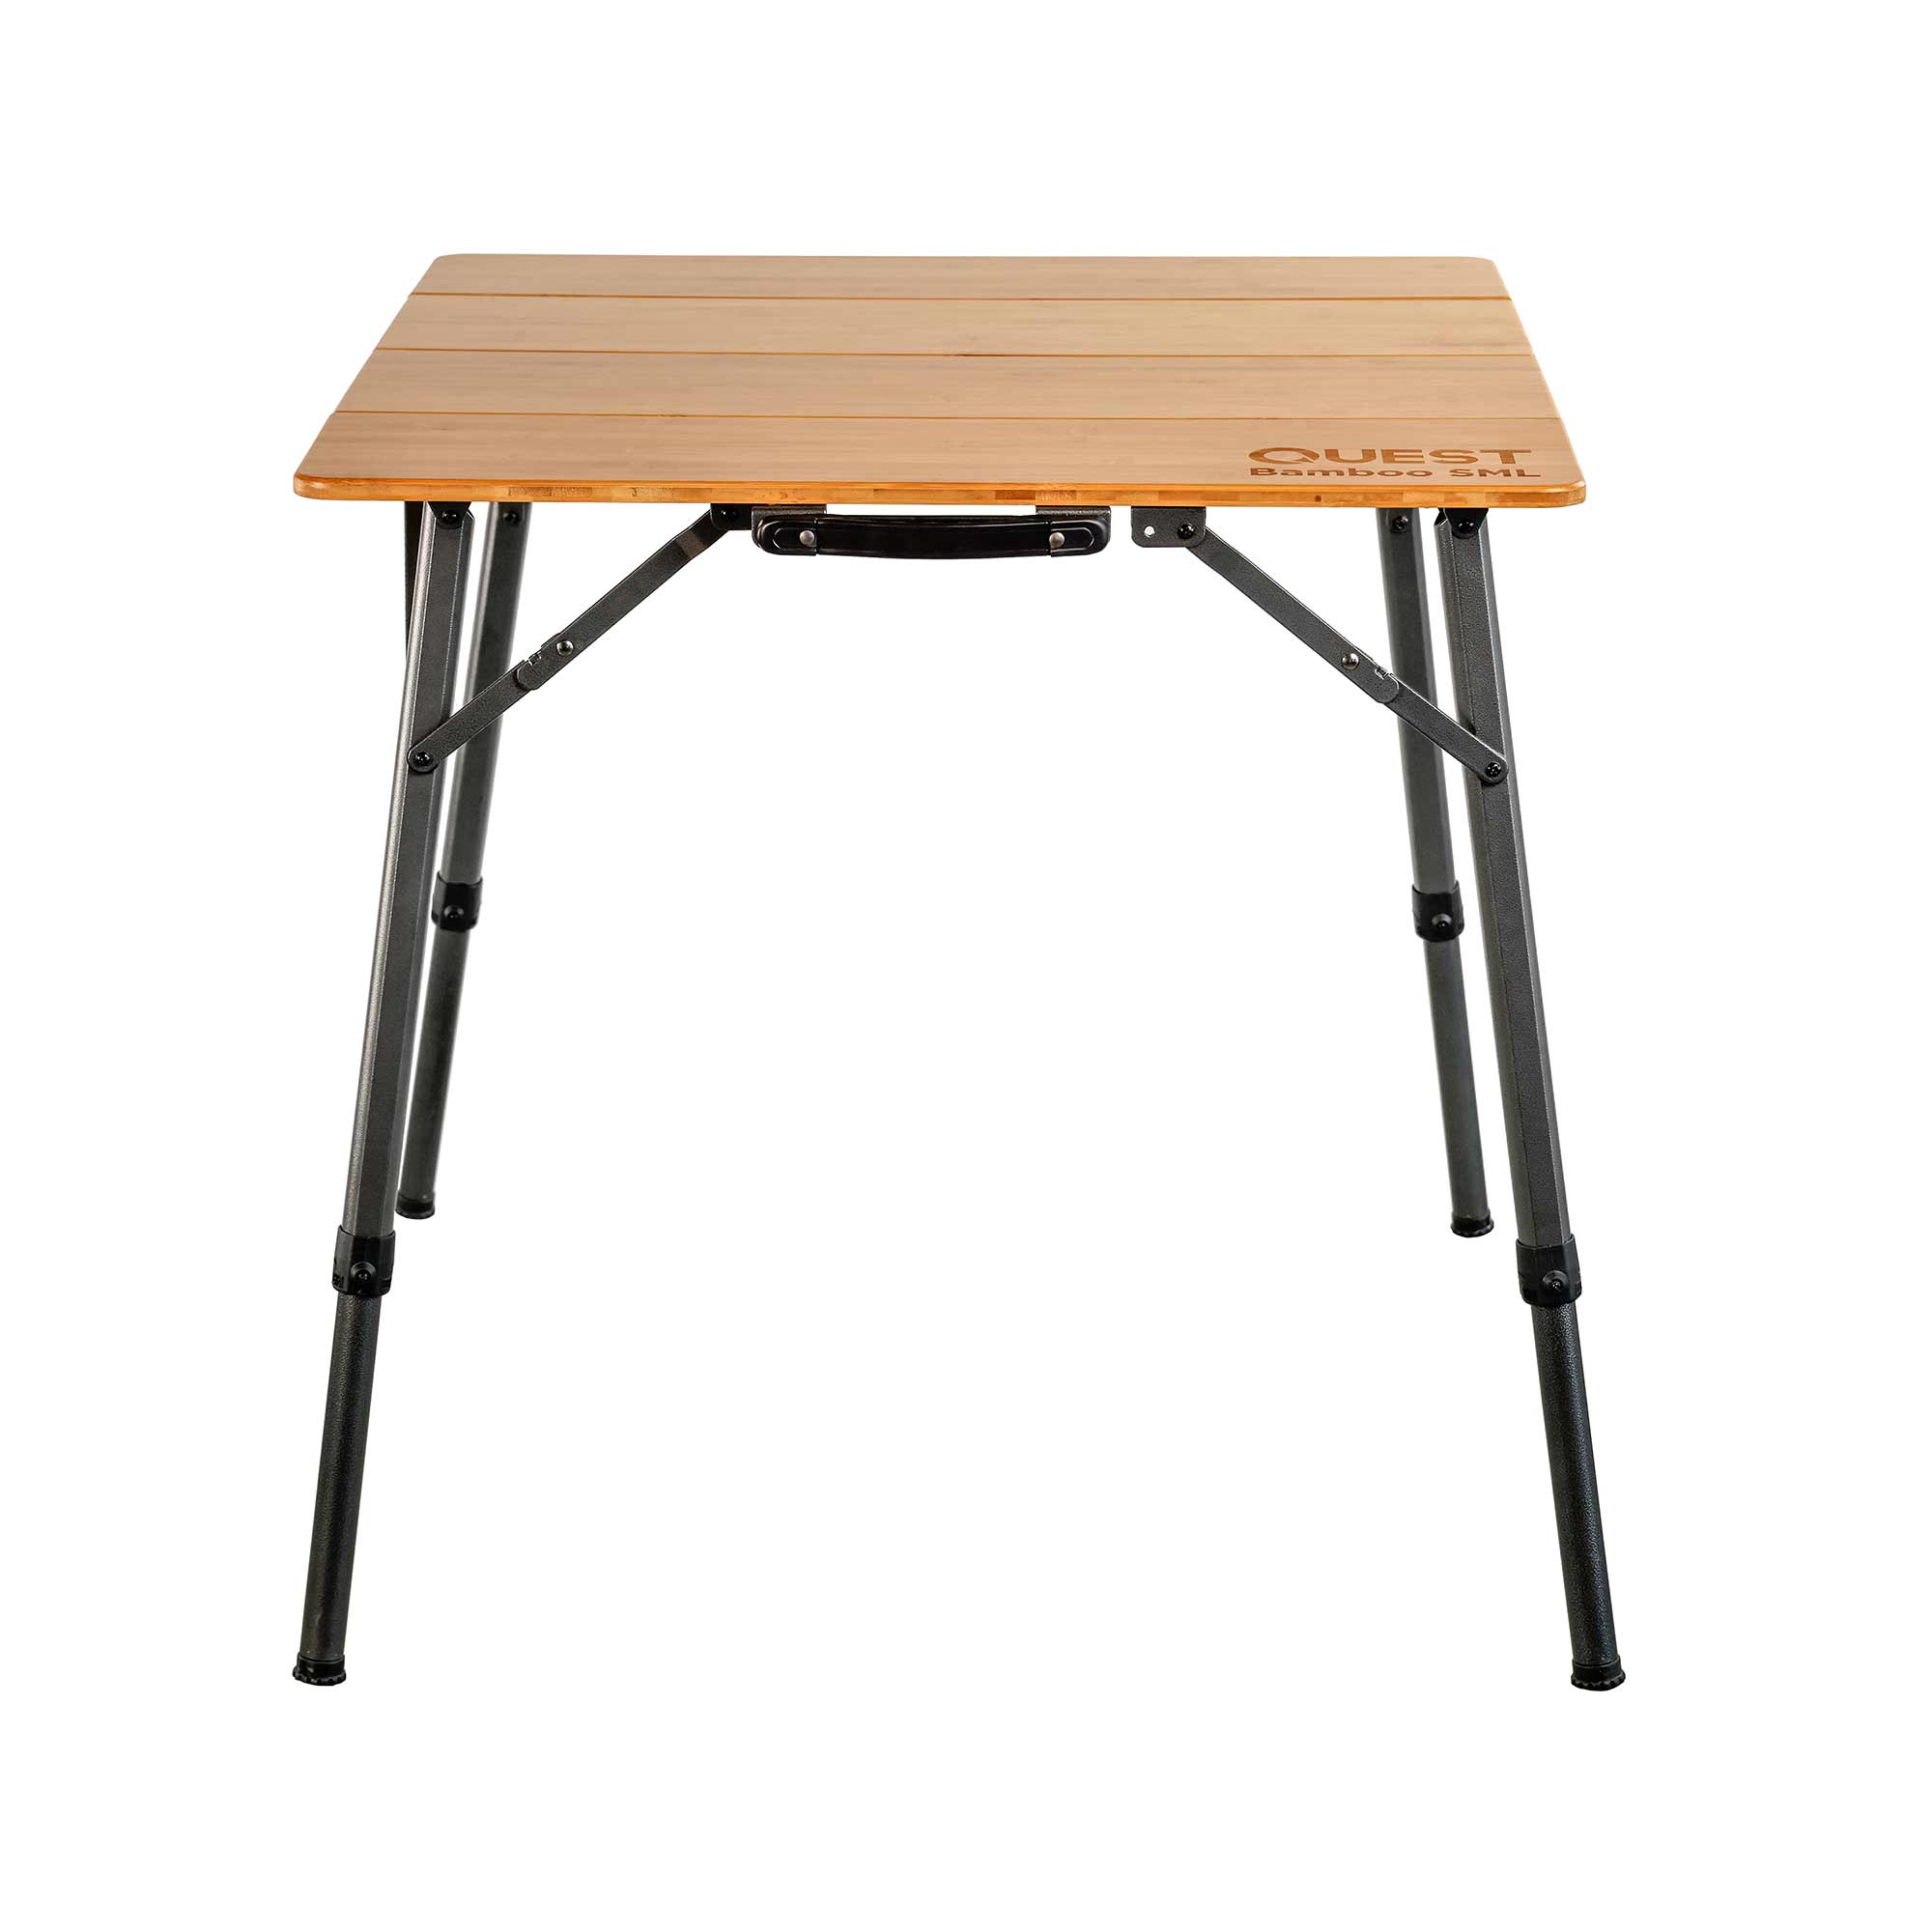 Quest Outdoors Bamboo Square Table Small